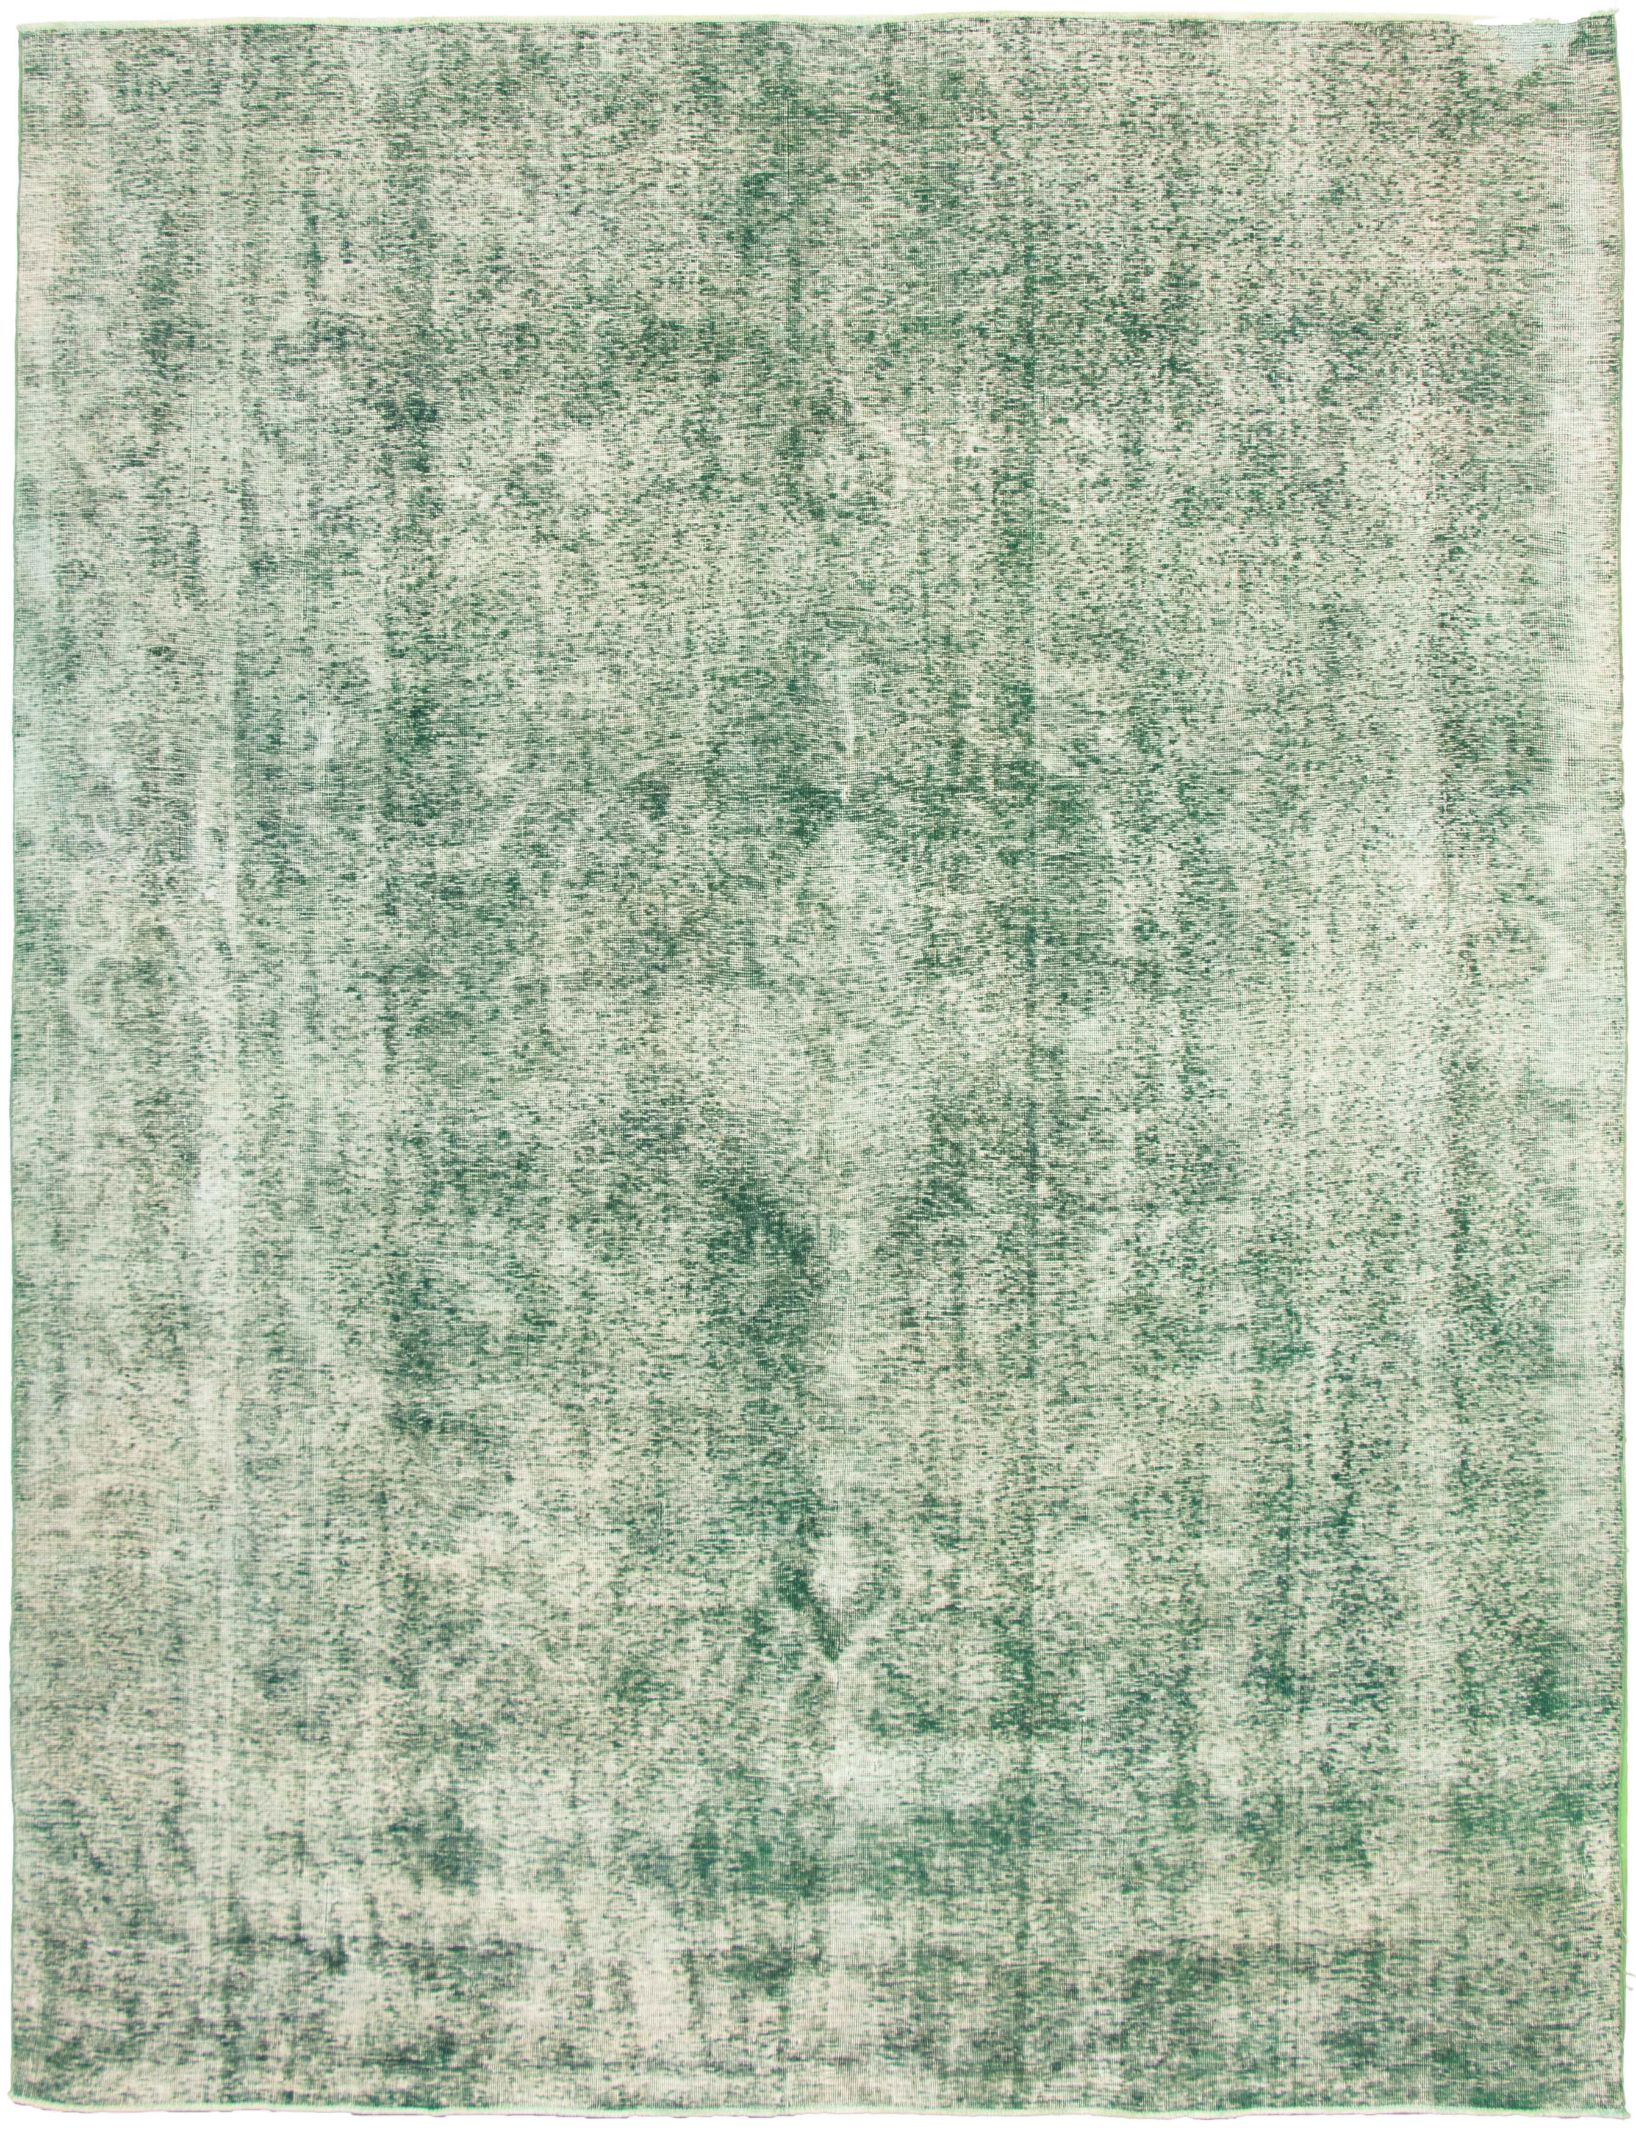 Hand-knotted Color Transition Dark Green Wool Rug 9'7" x 12'5" Size: 9'7" x 12'5"  